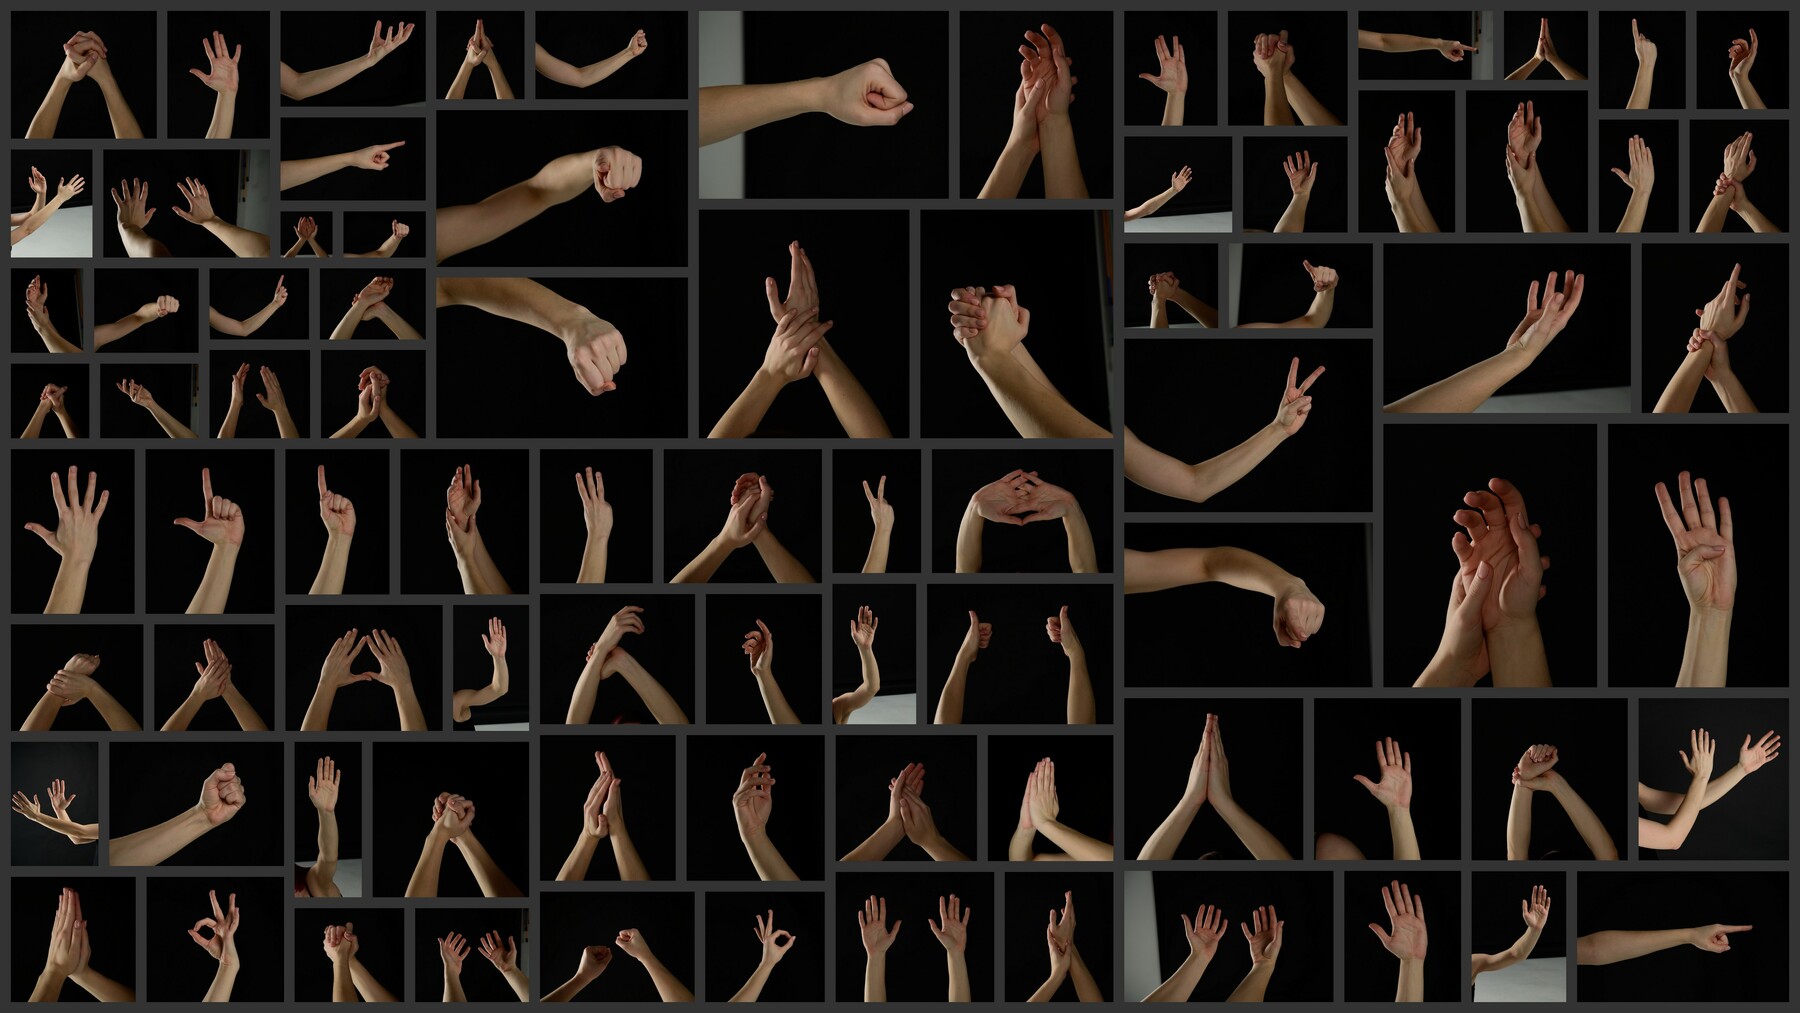 Need reference of HAND POSES with custom lighting? There are 50+ presets,  including closed & open hand poses. ლ(・ิω・ิლ) Link to the FREE reference  app... | By Magic Poser - Pose Tool